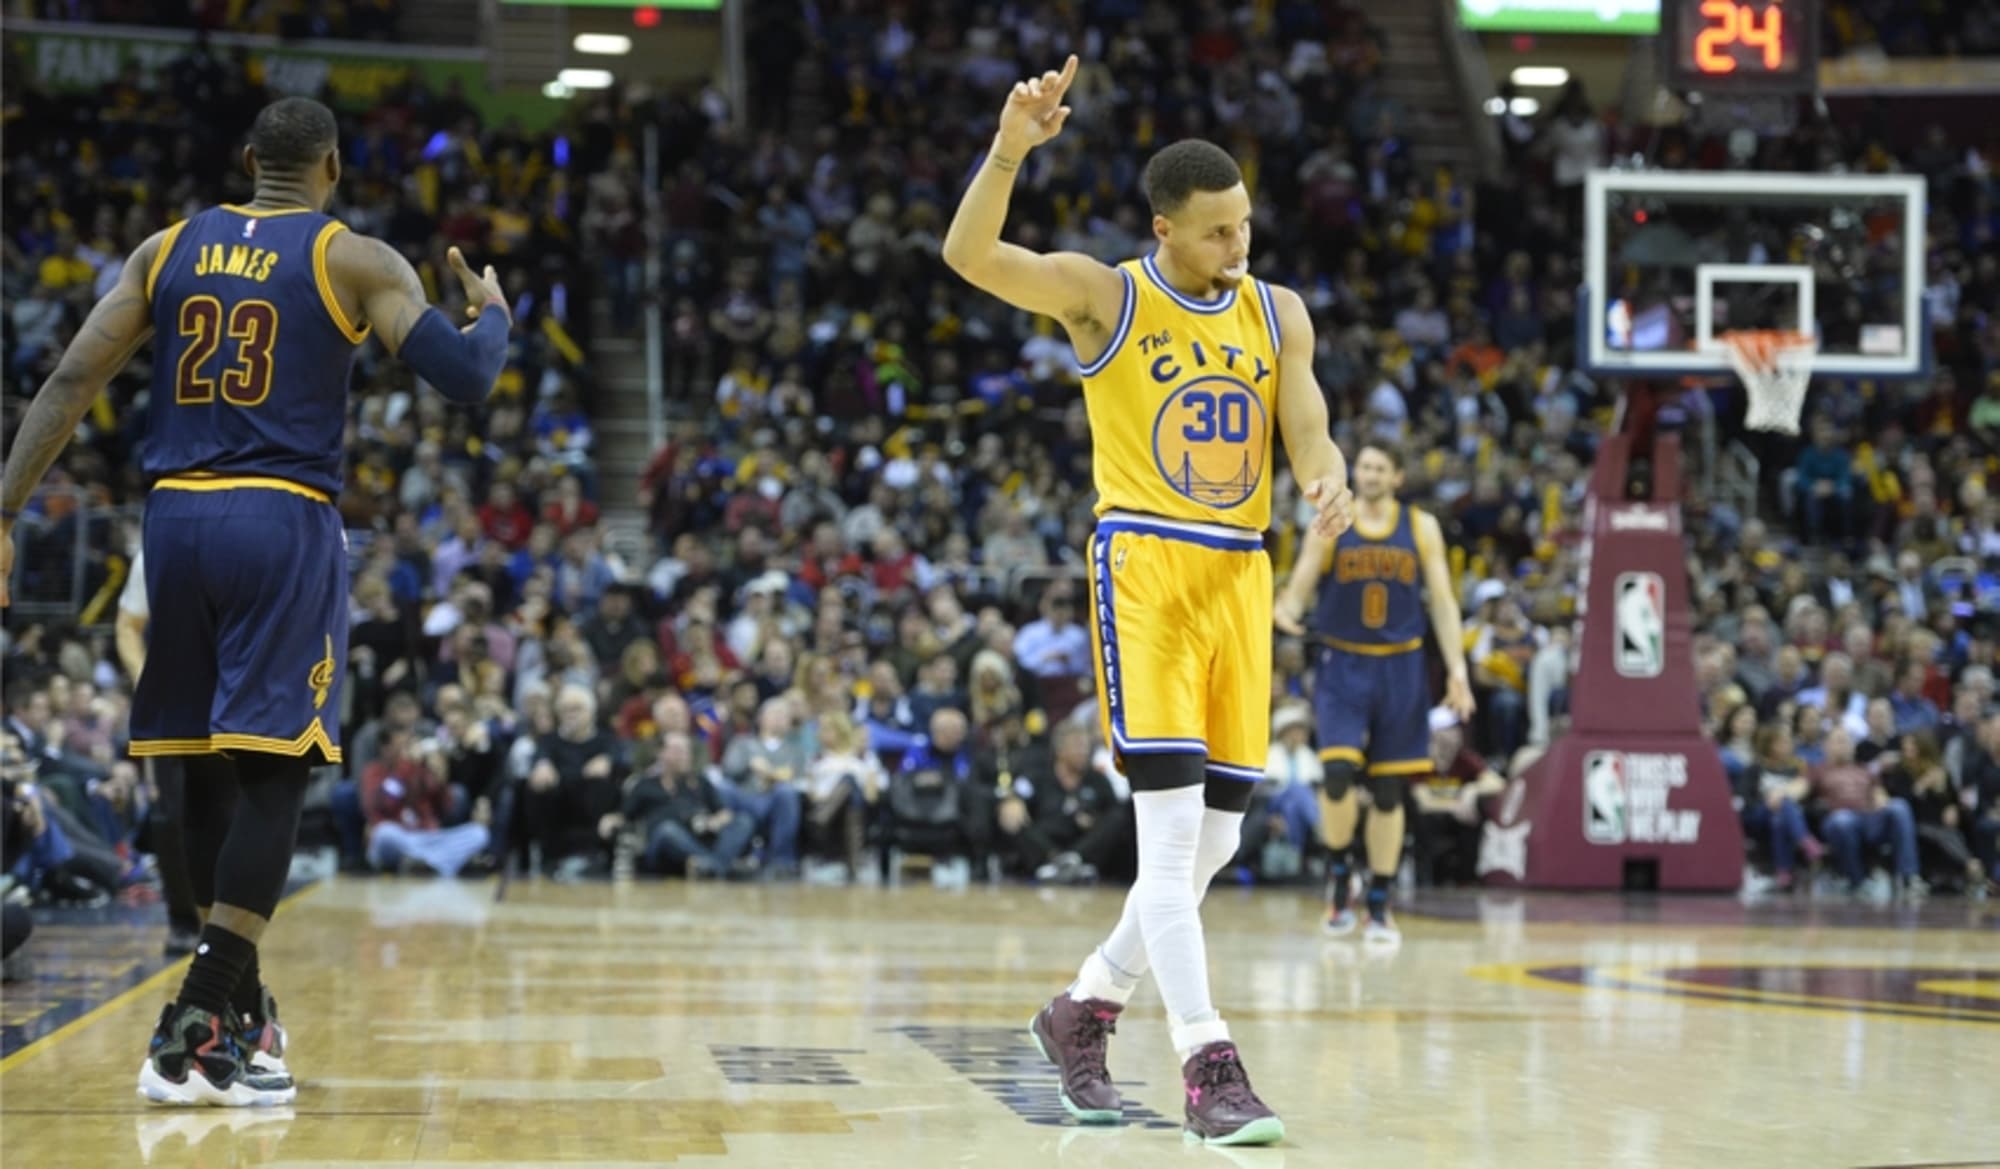 Stephen Curry of Golden State Warriors overtakes LeBron James of